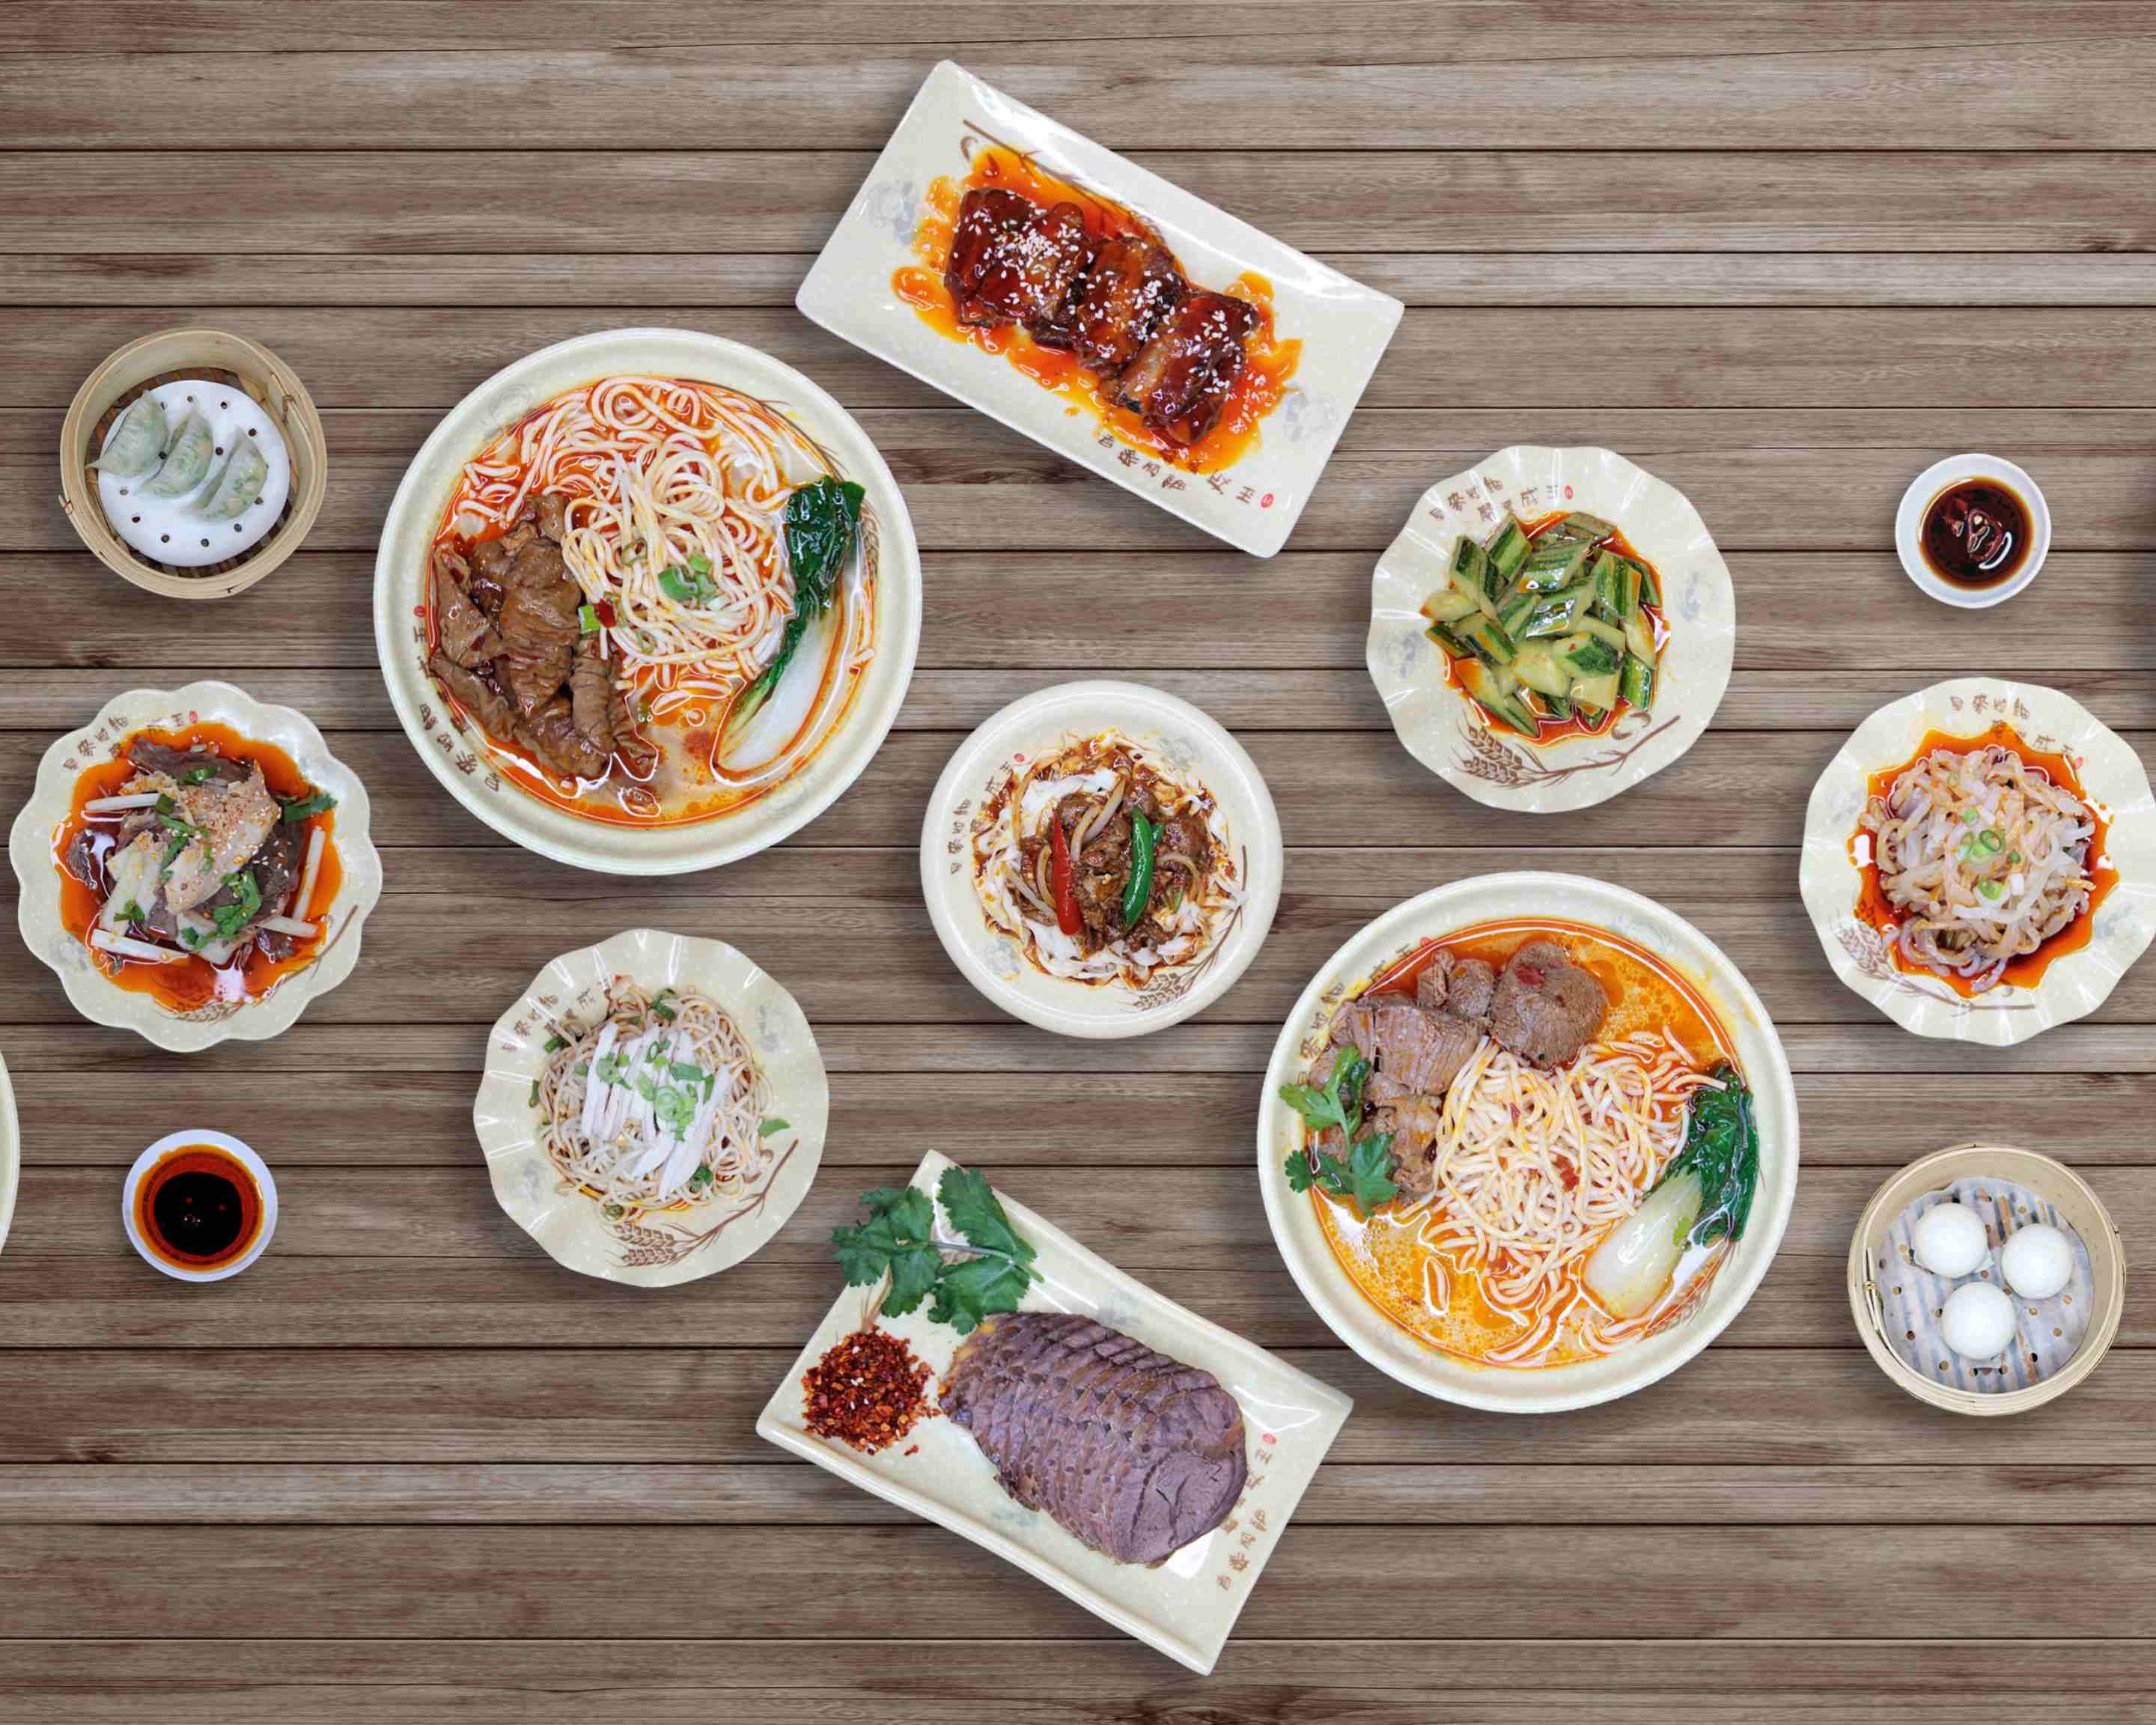 A spread of dishes from Sichuan Popo seen from above, including cold chicken, noodles, greens, and noodle soup